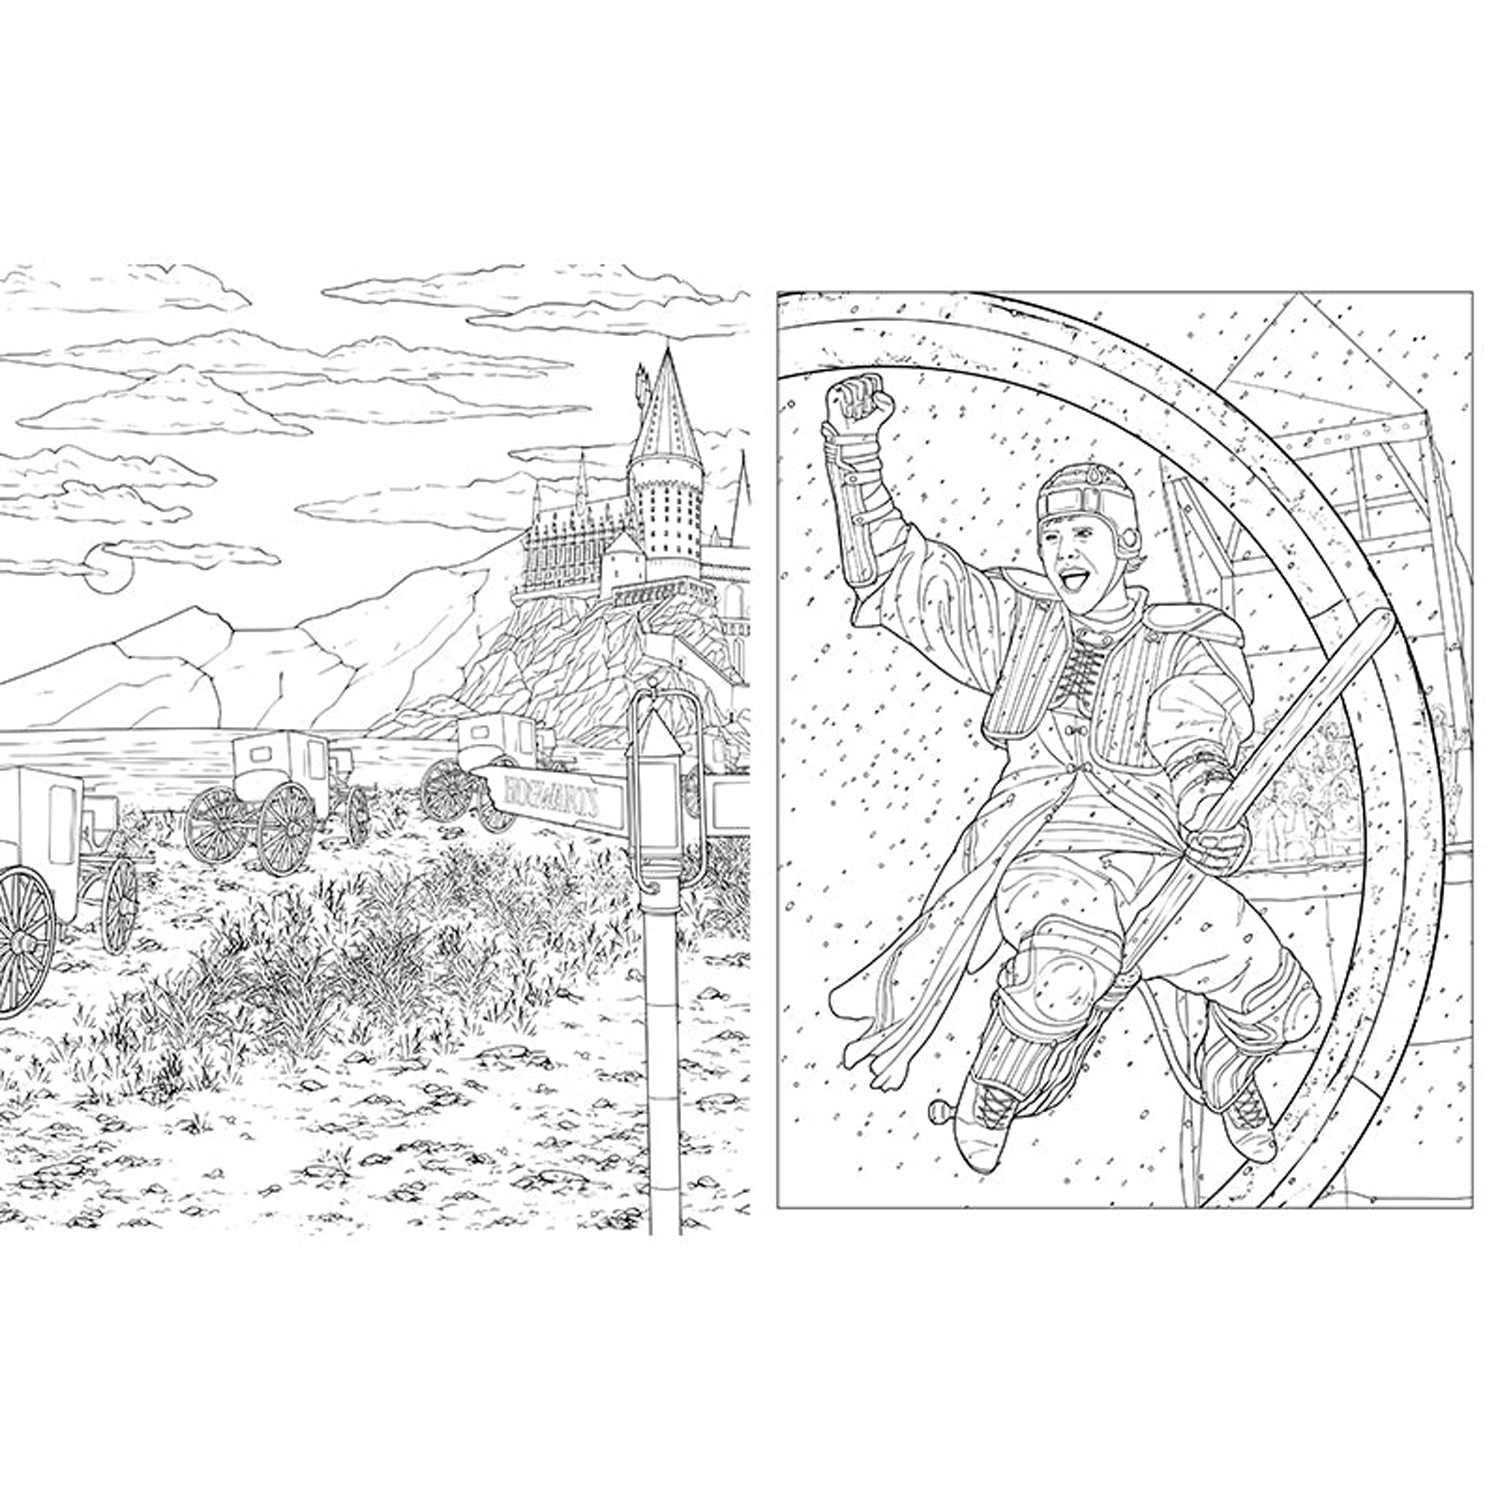 Harry Potter: Travels Through the Wizarding World Coloring Book